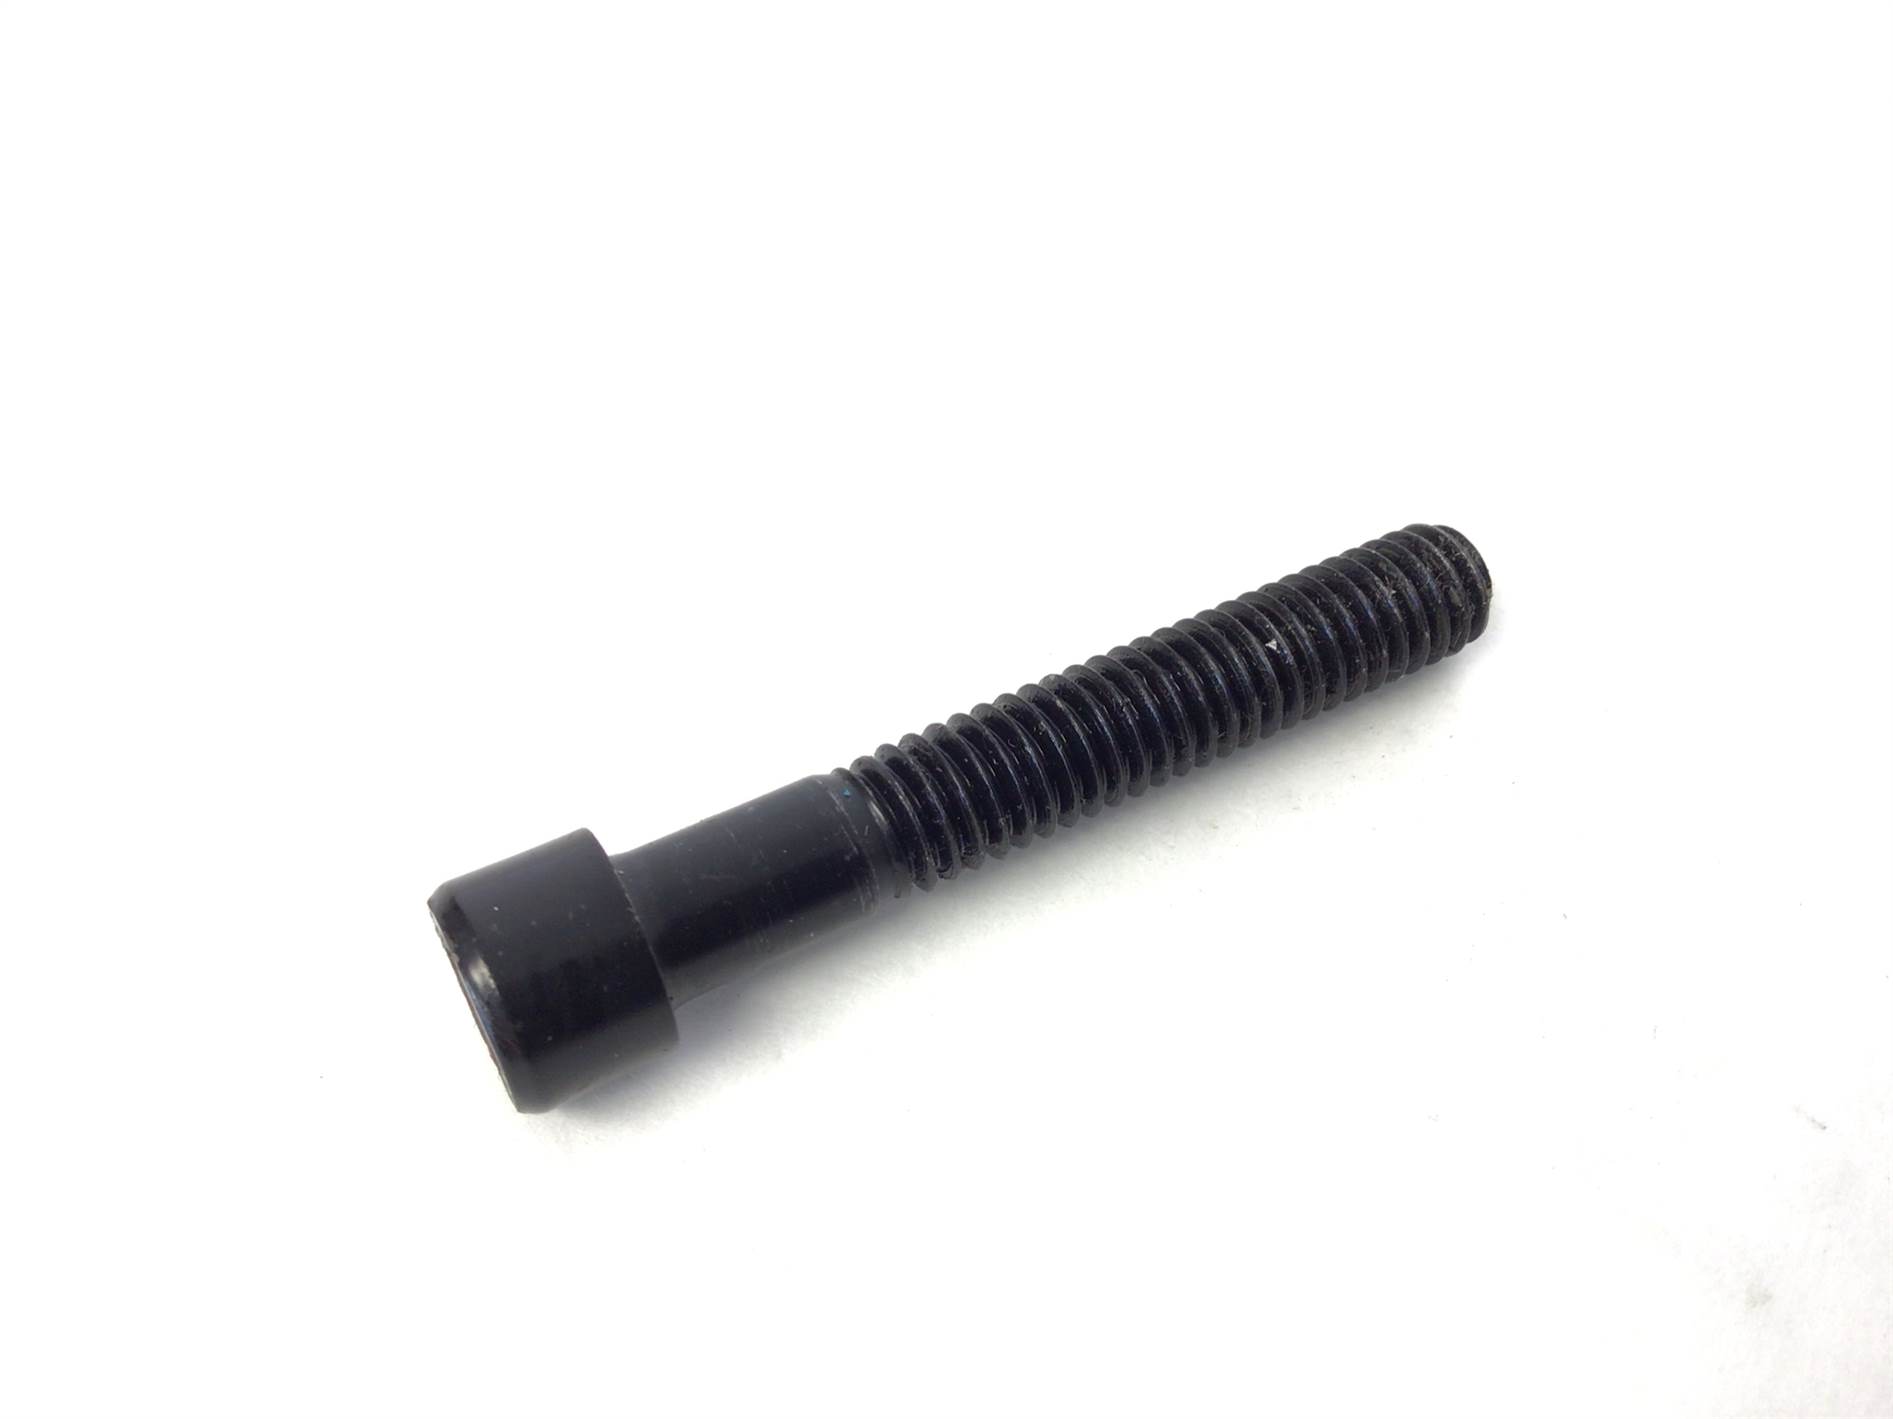 Front Roller Socket Cap Screw 5/16-18x2 Inches (Used)